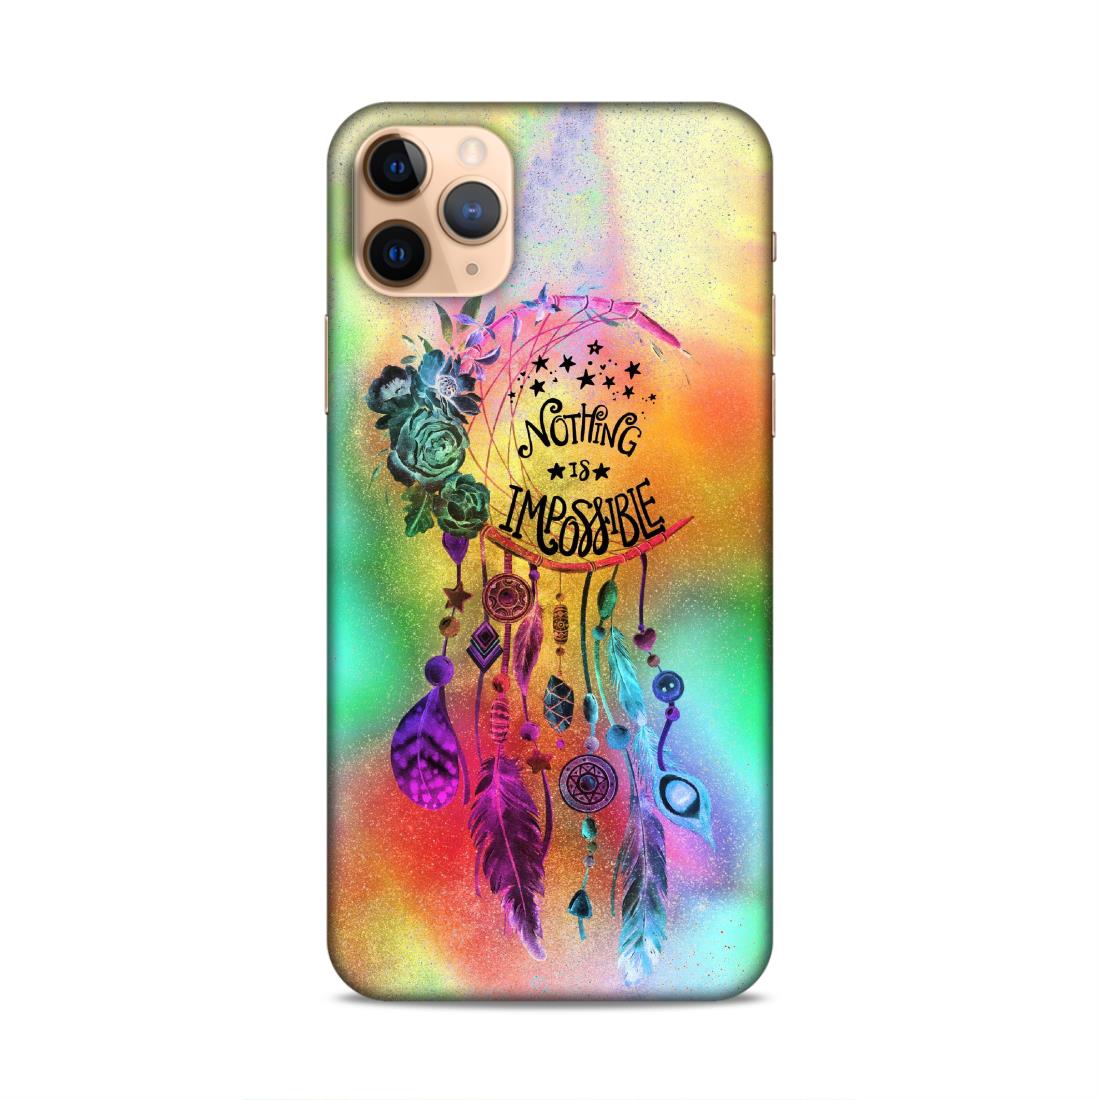 Impossible Hard Back Case For Apple iPhone 11 Pro